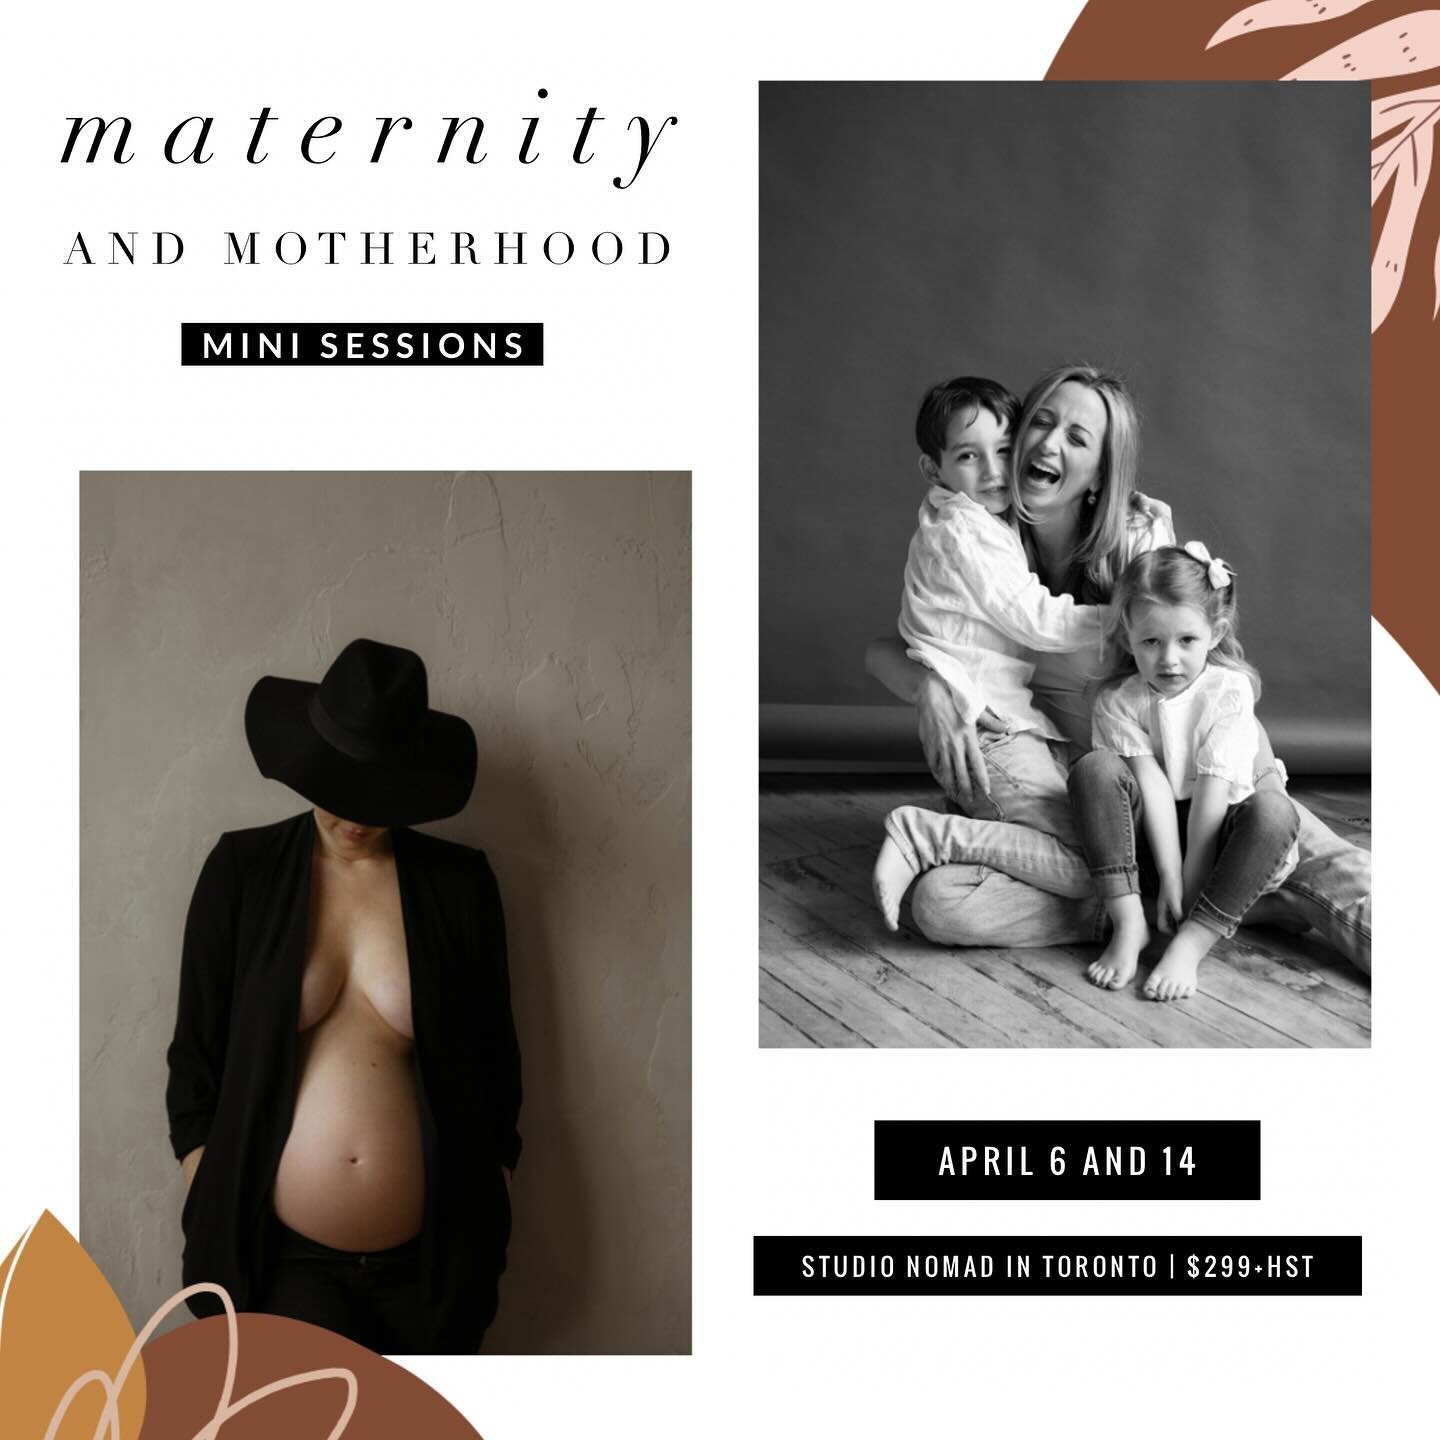 Celebrate Mother&rsquo;s Day this year&hellip;

with a mini photo session! 😊

This is perfect for a maternity session, mom+kids, and grandmothers! The sessions are $299+HST, 25 minutes  long (includes 15 images + studio fee). You can also gift the p